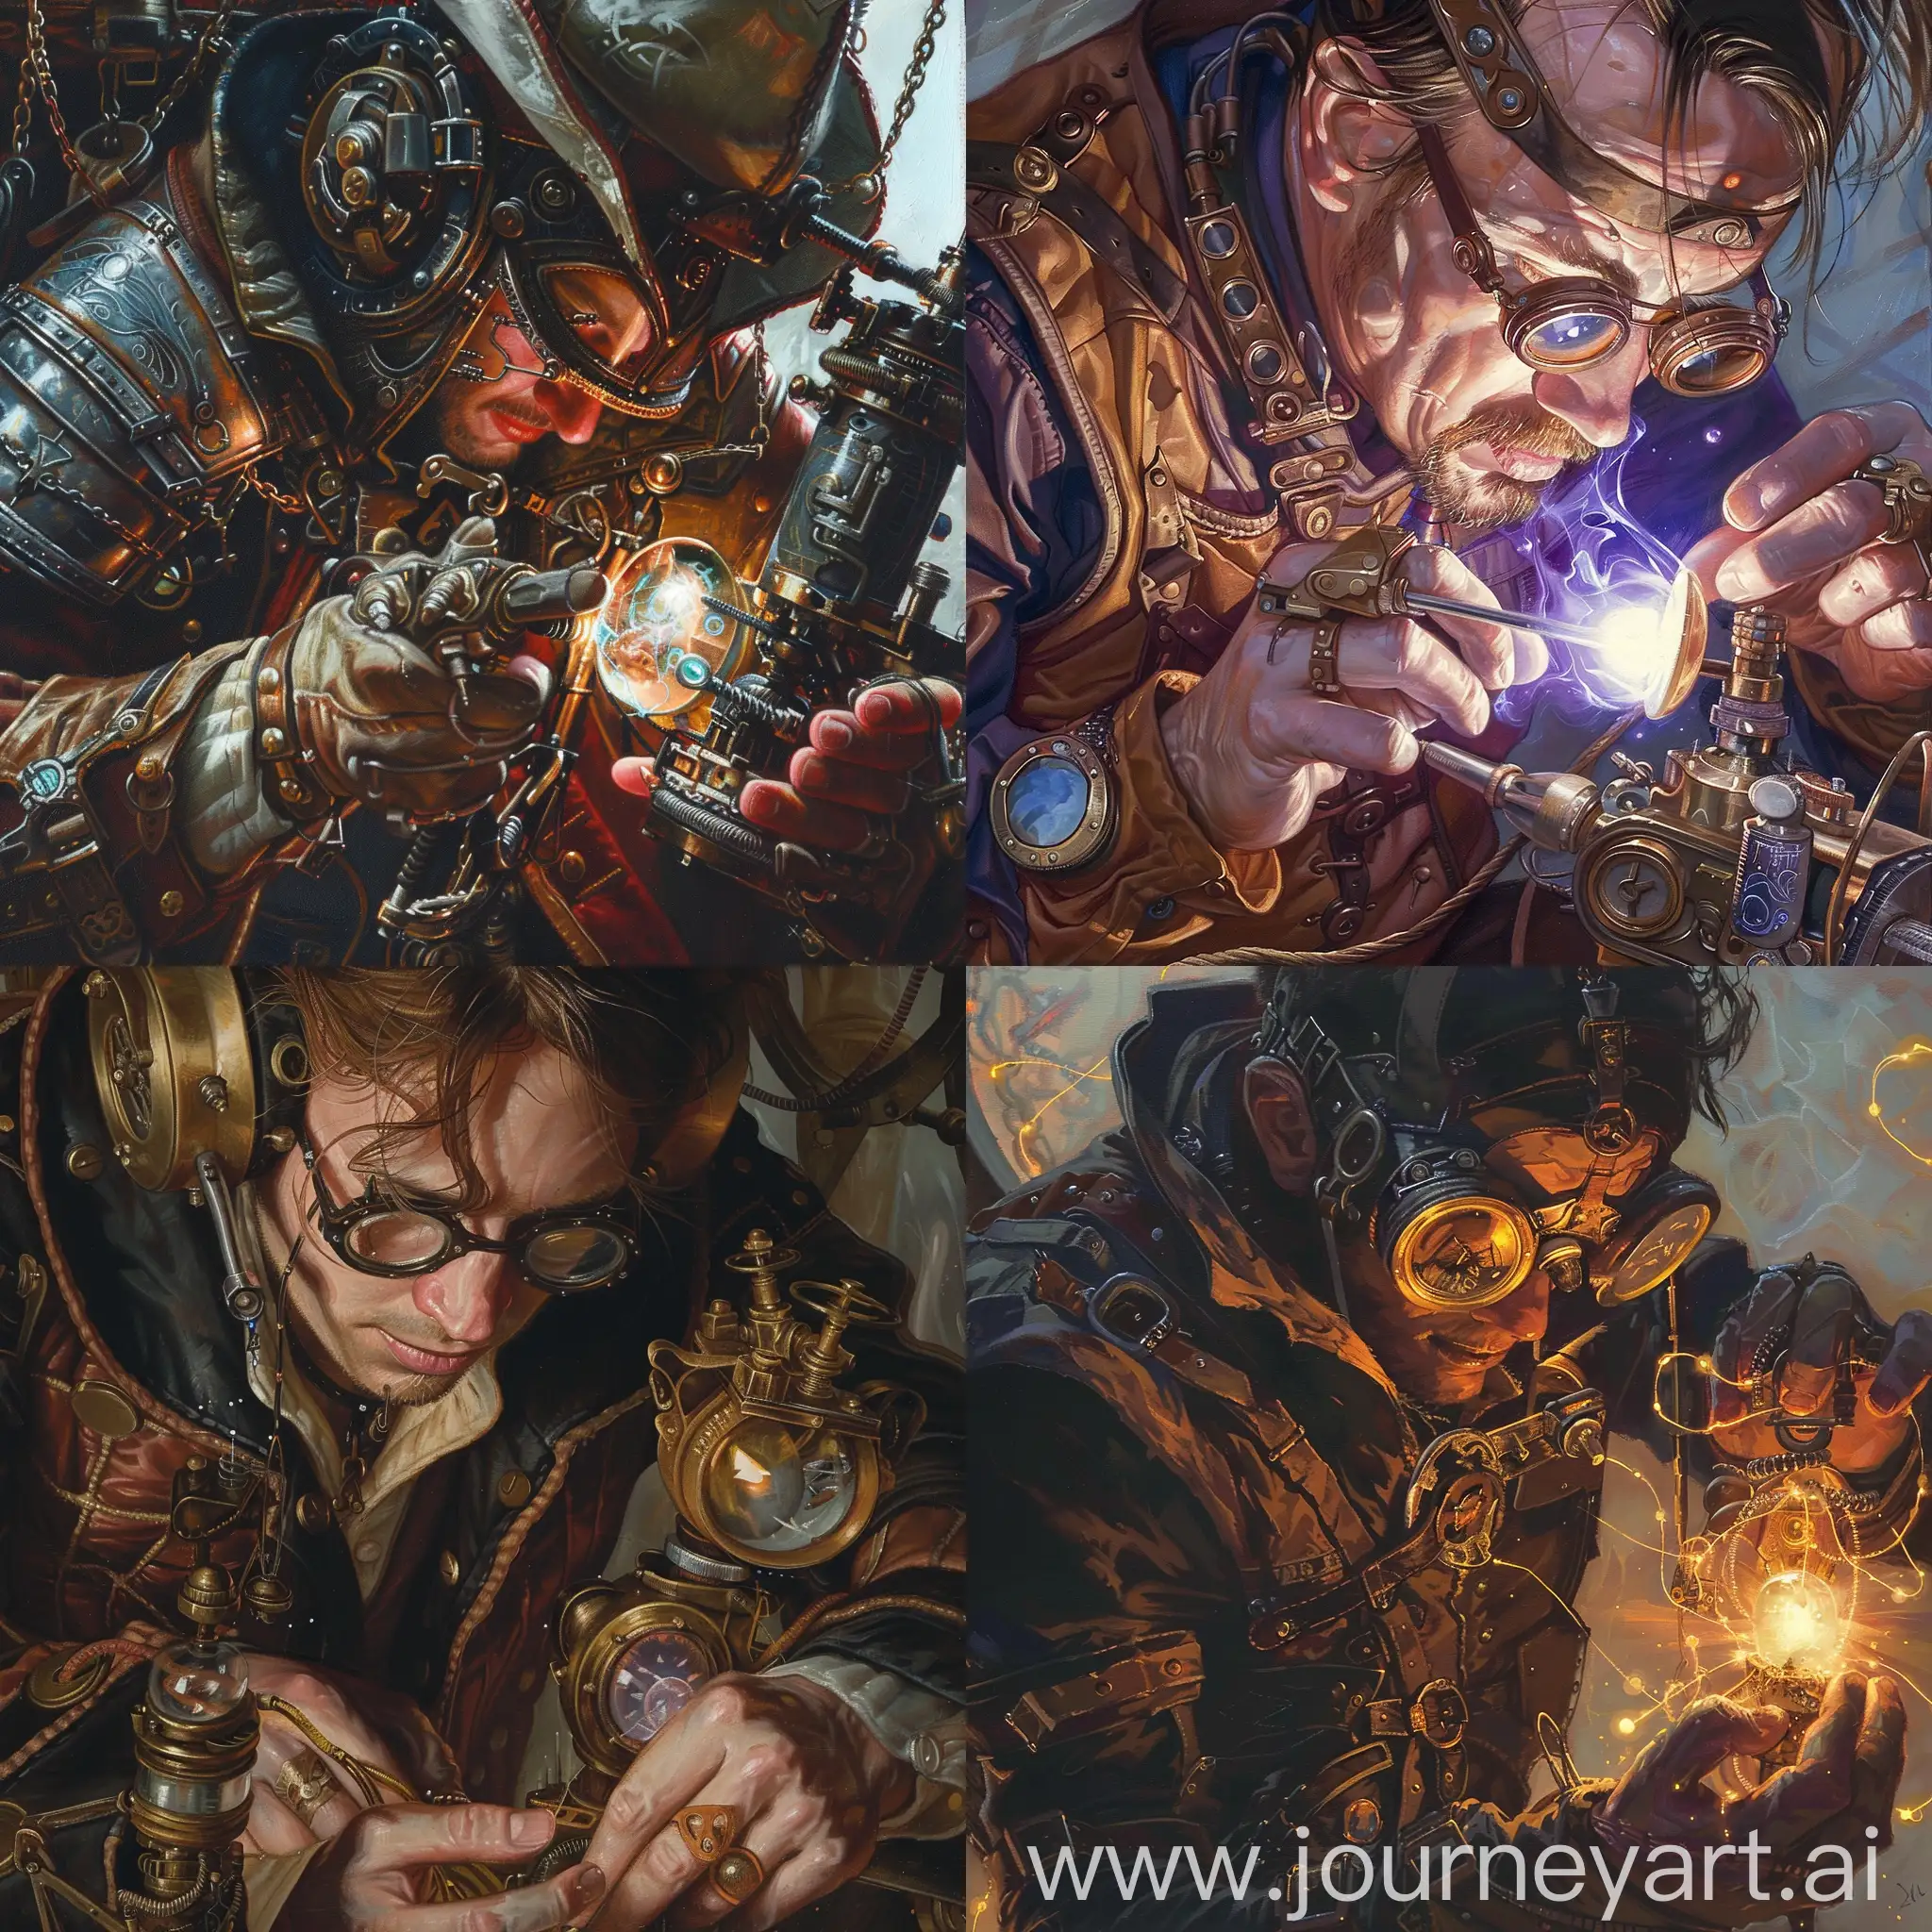 extreme close up of a steam punk mage tinkering with a device that holds magic.
In the art style of Terese Nielsen oil painting.